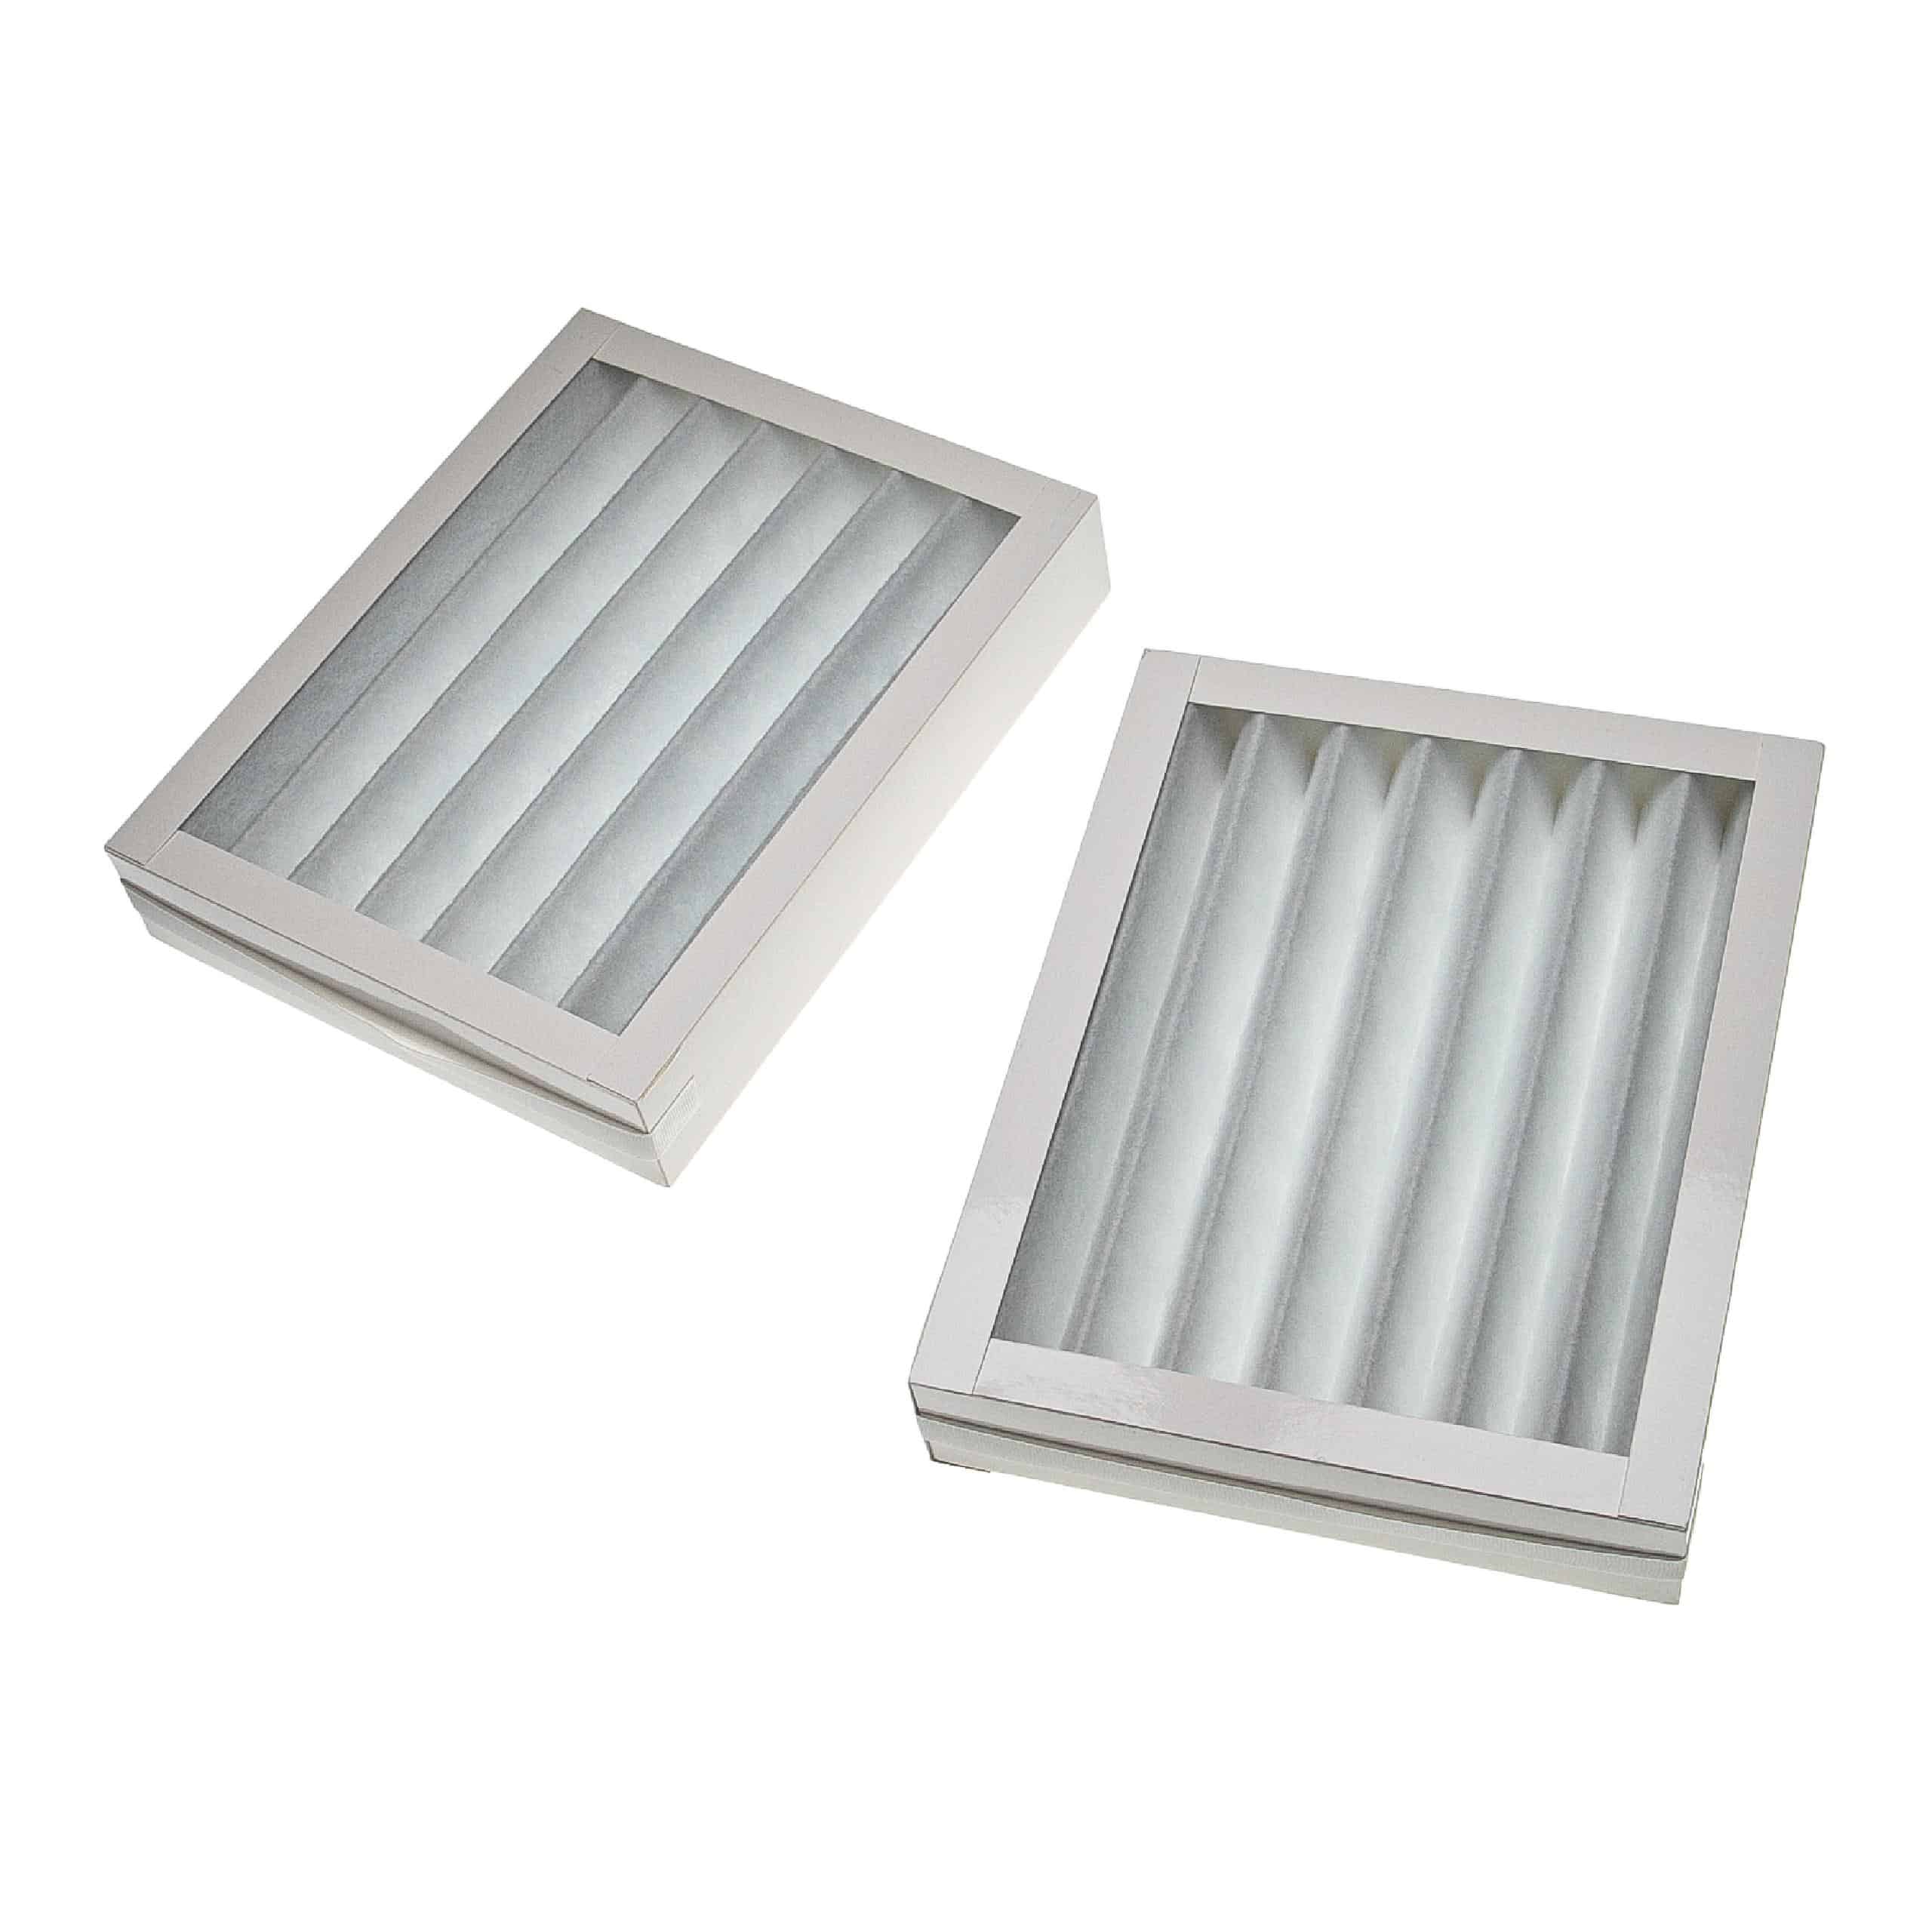 2x Filter G4 replaces Paul 524000040 for Paul Air Ventilation Device - Coarse Dust Filters